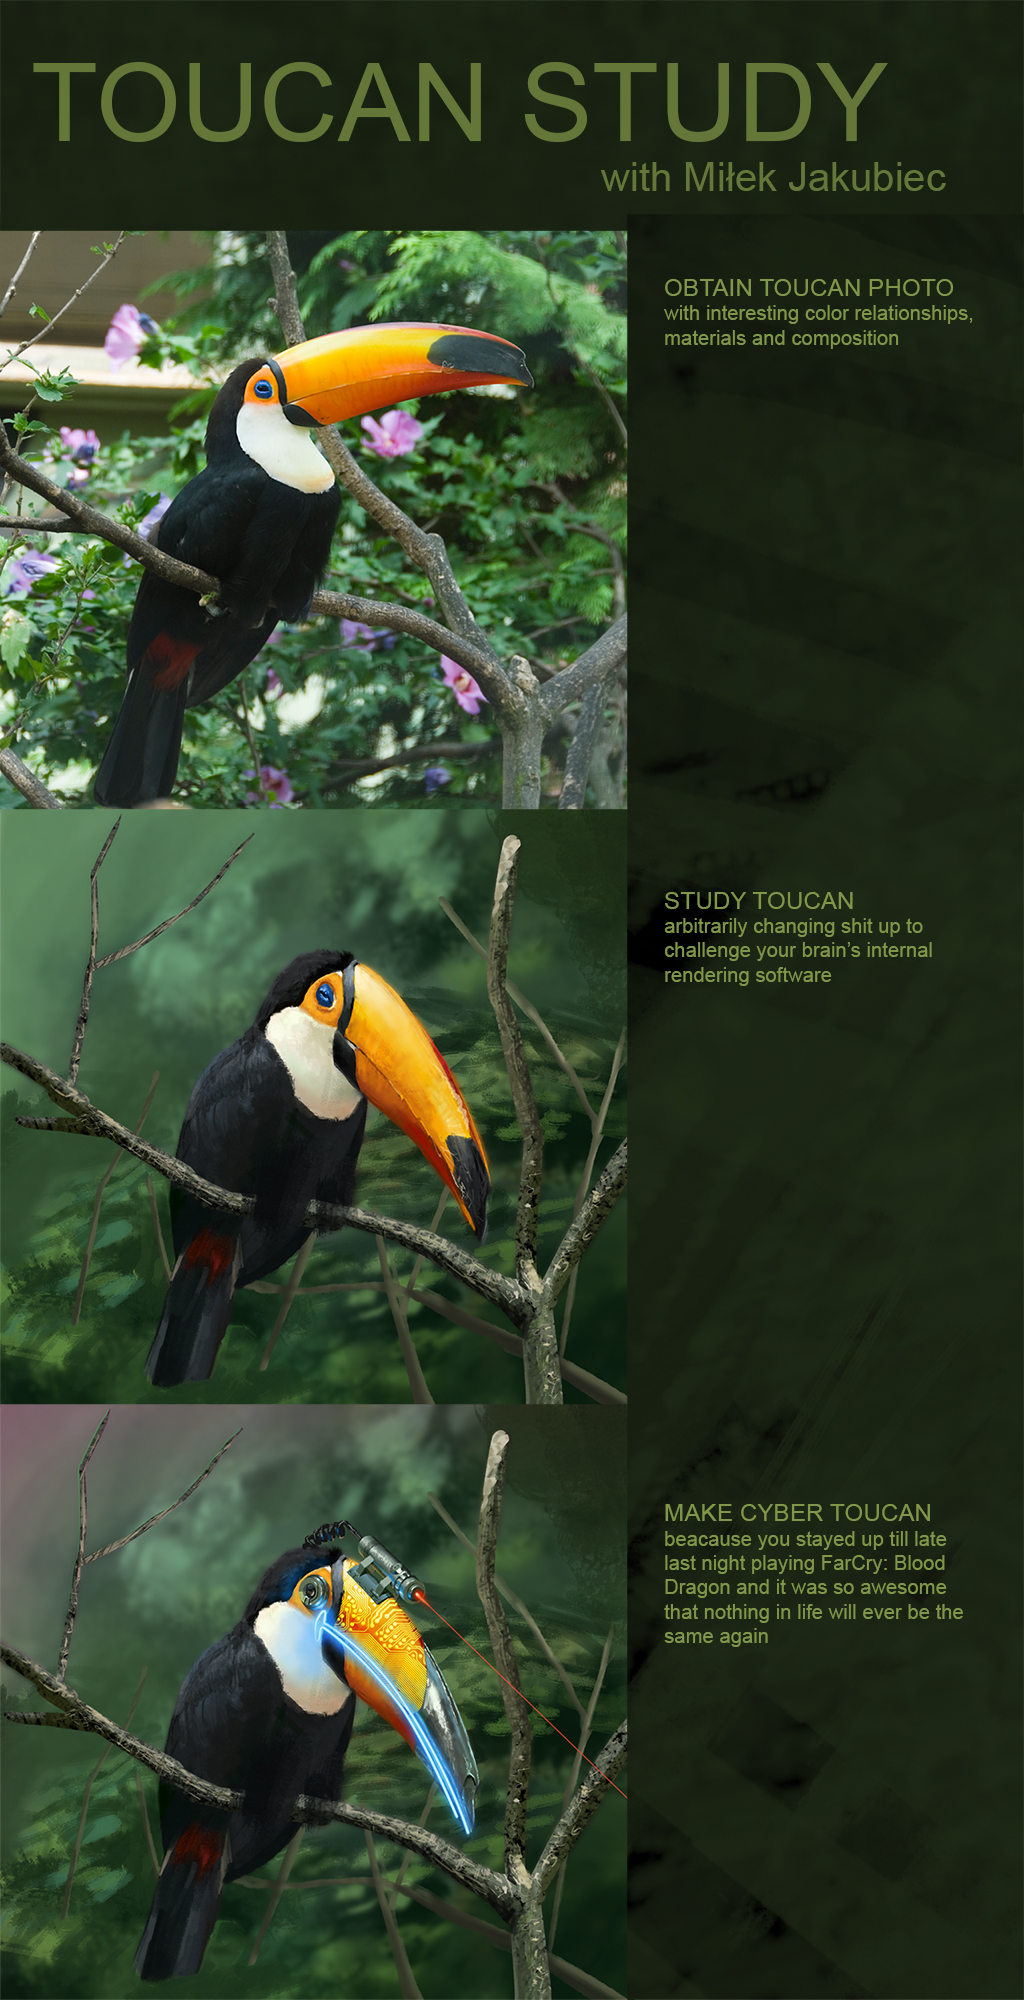 [Image: toucan_study_by_ethicallychallenged-d662cla.jpg]